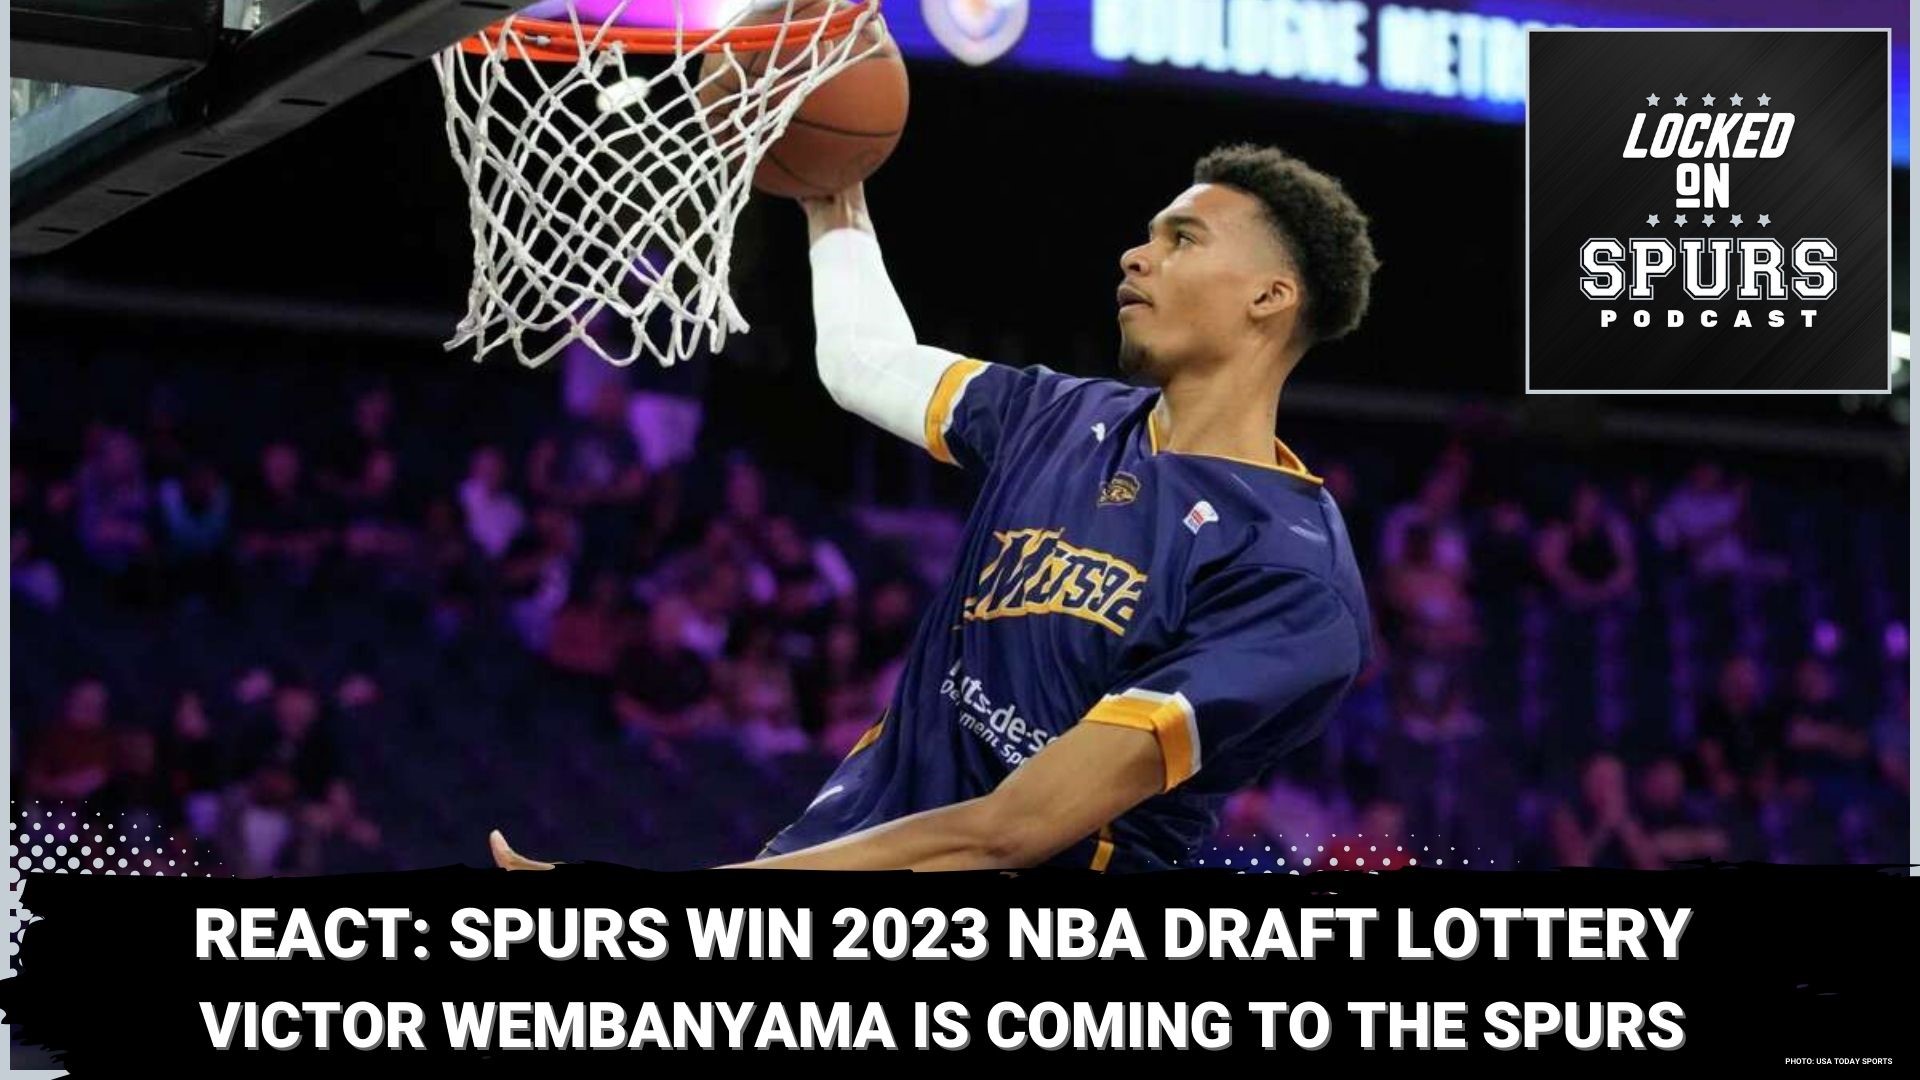 The Spurs will be selecting No. 1 overall at the 2023 NBA Draft.